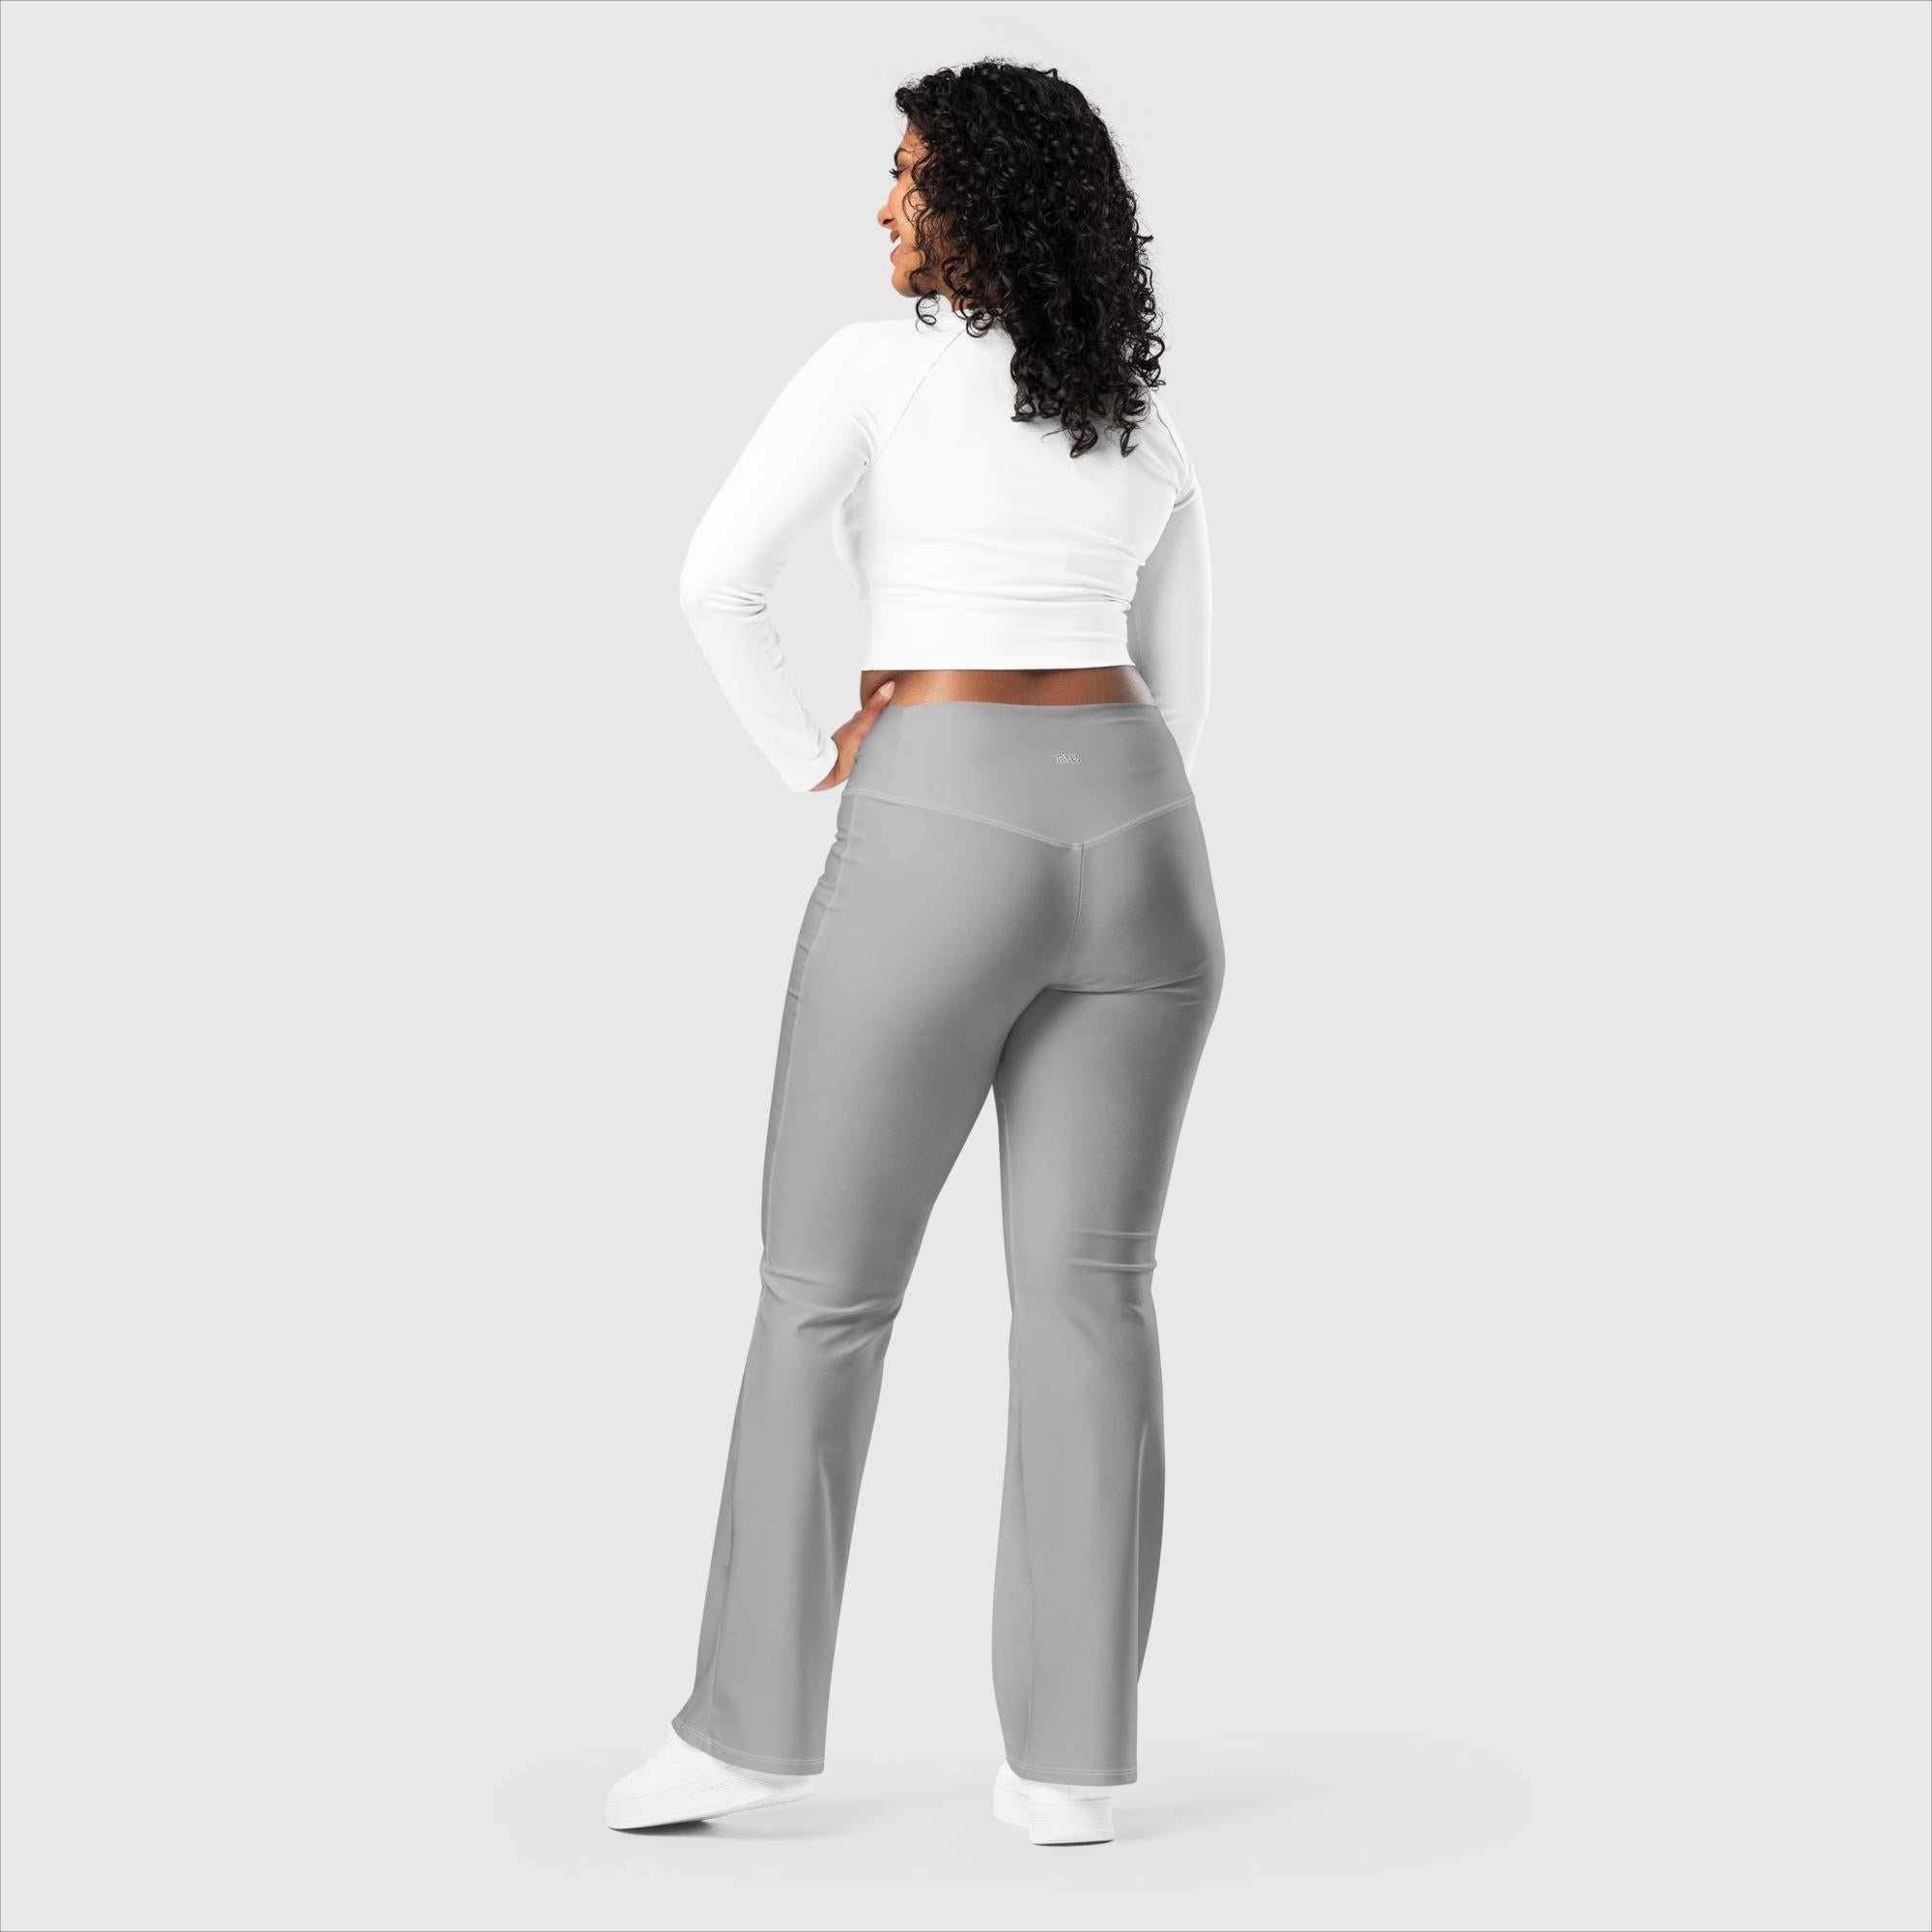 Grey flare leggings with high waist and back inside pocket